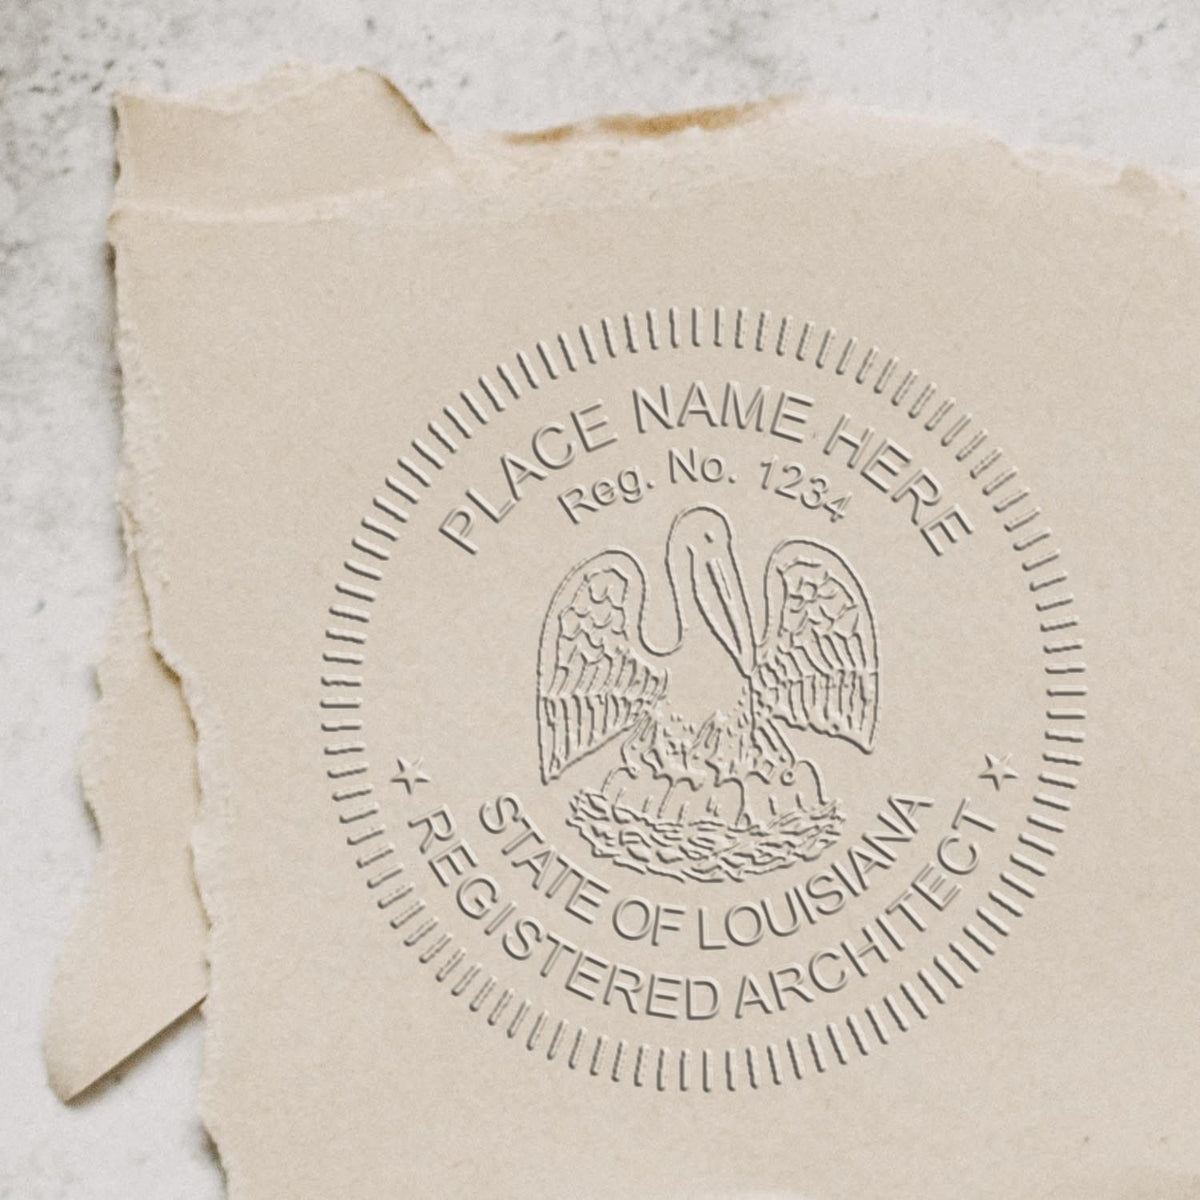 An alternative view of the State of Louisiana Long Reach Architectural Embossing Seal stamped on a sheet of paper showing the image in use